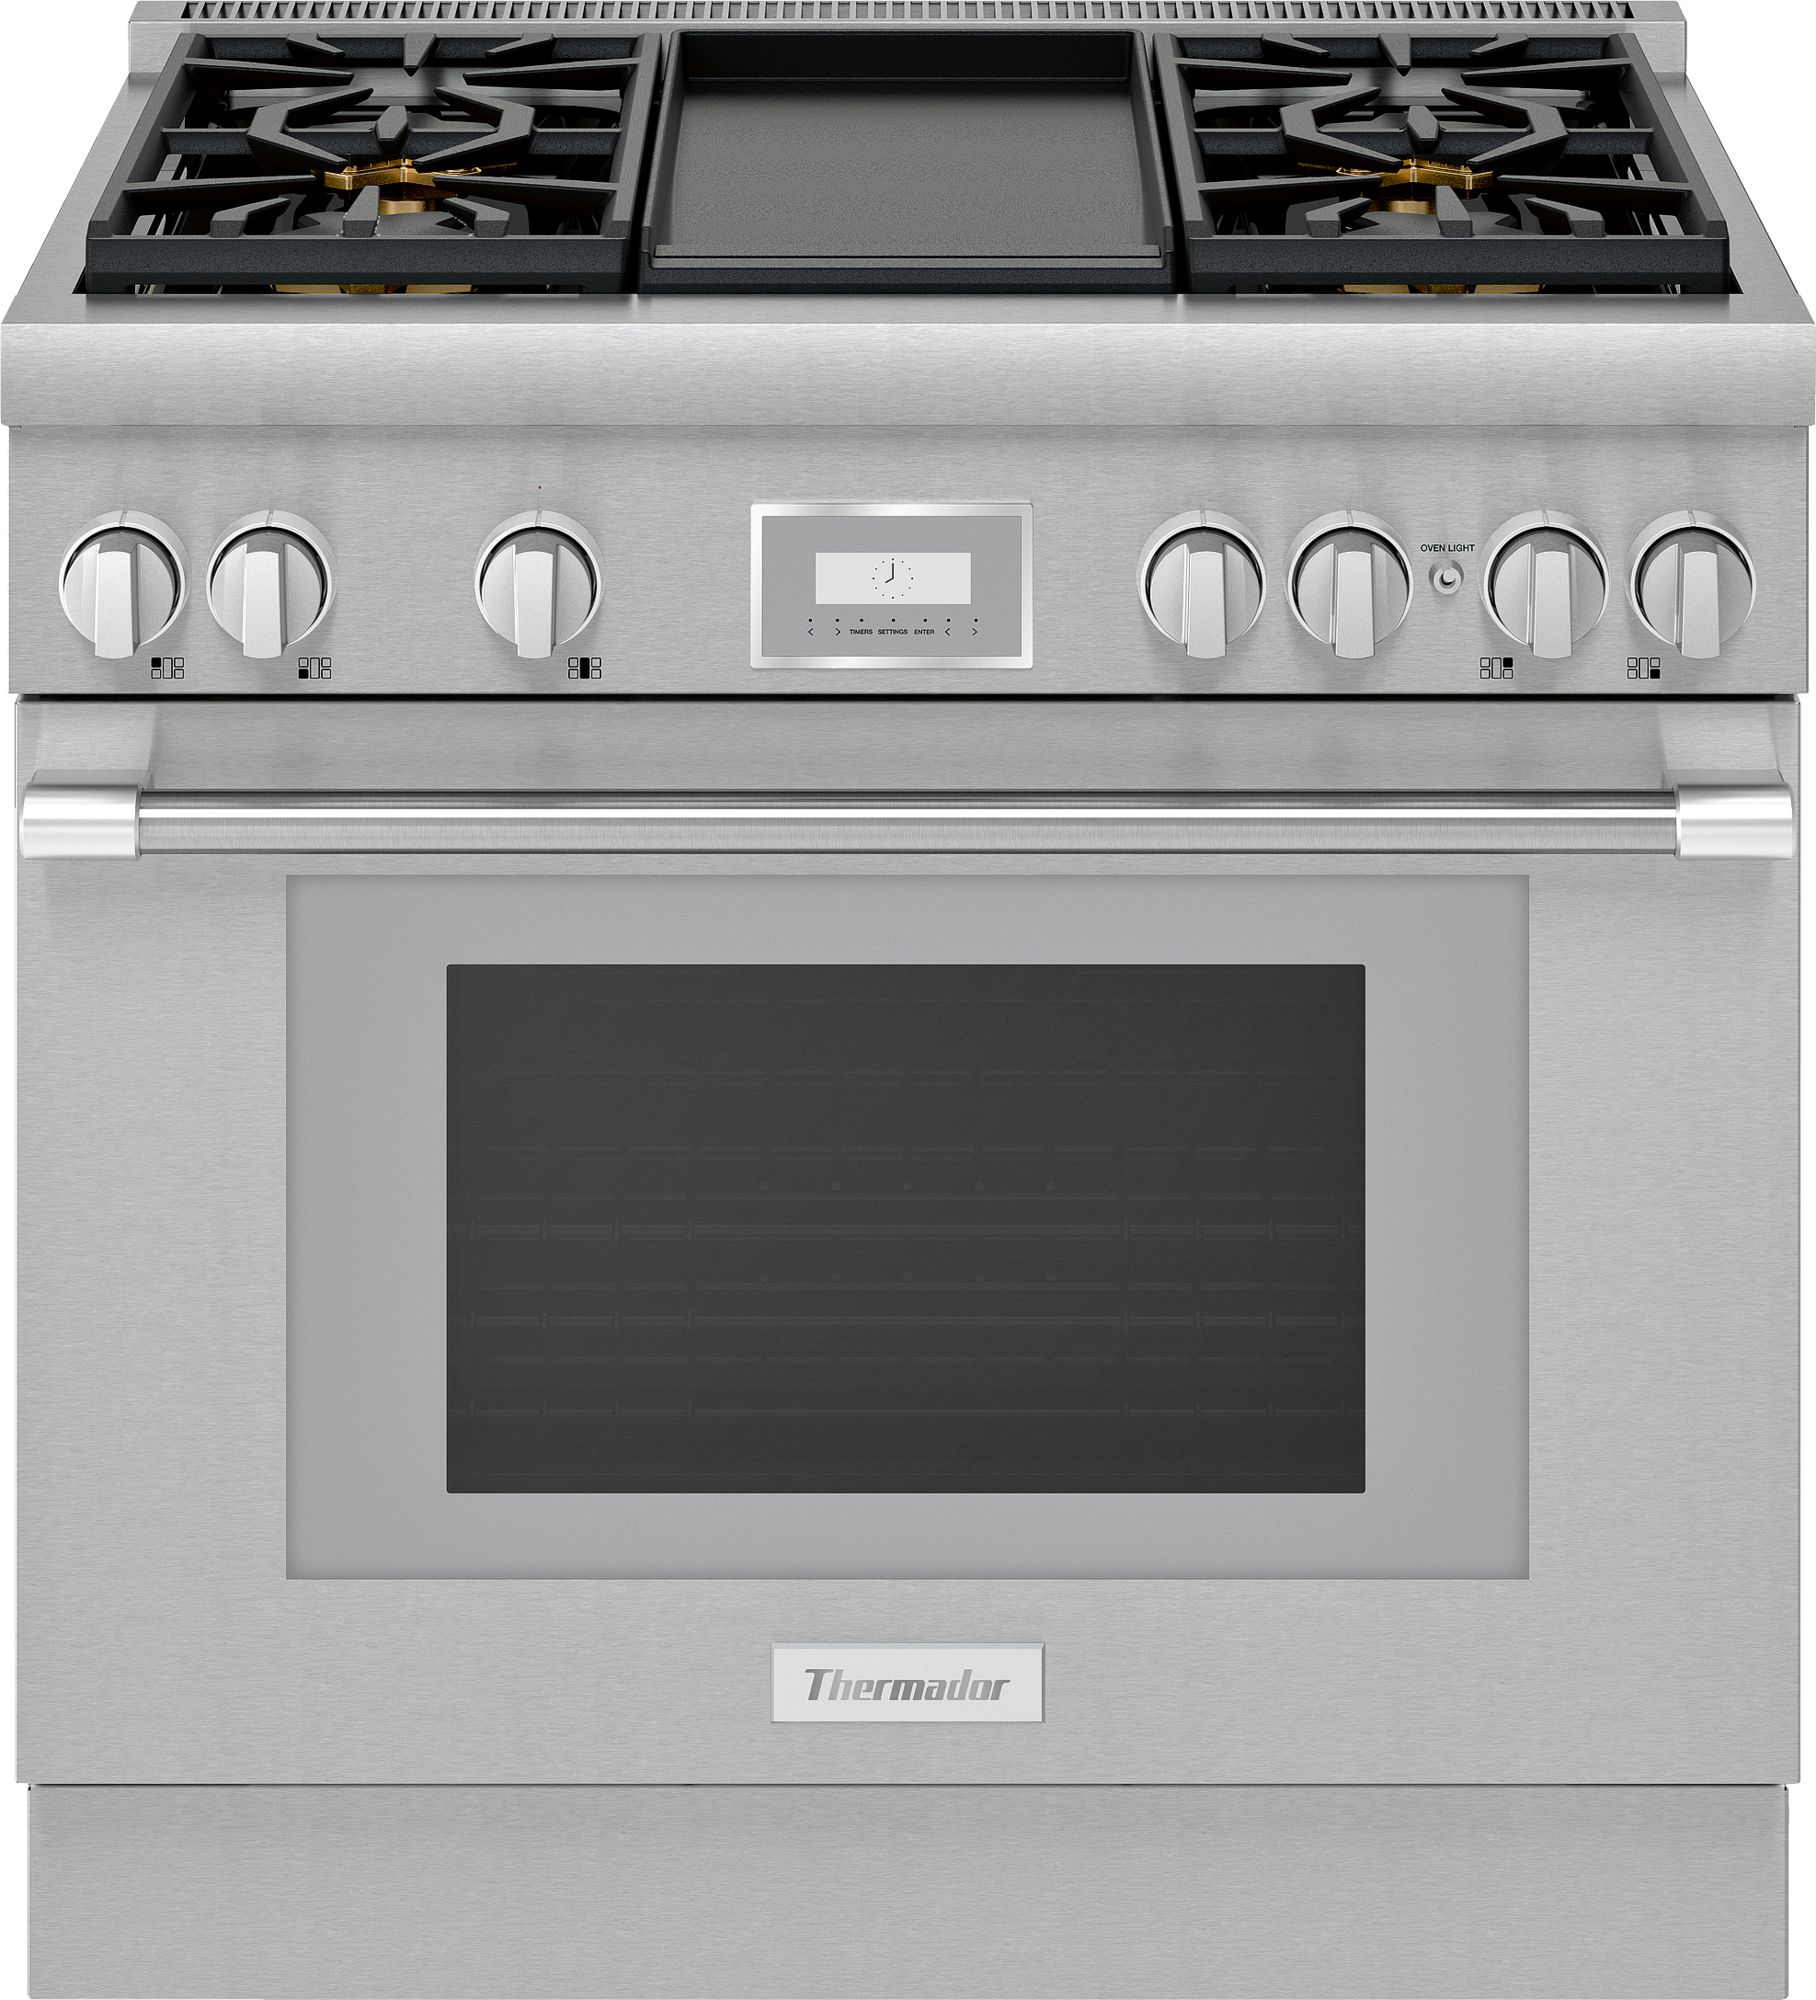 Stock photo of a stainless steel Thermador brand range with large handle and frontal digital controls.